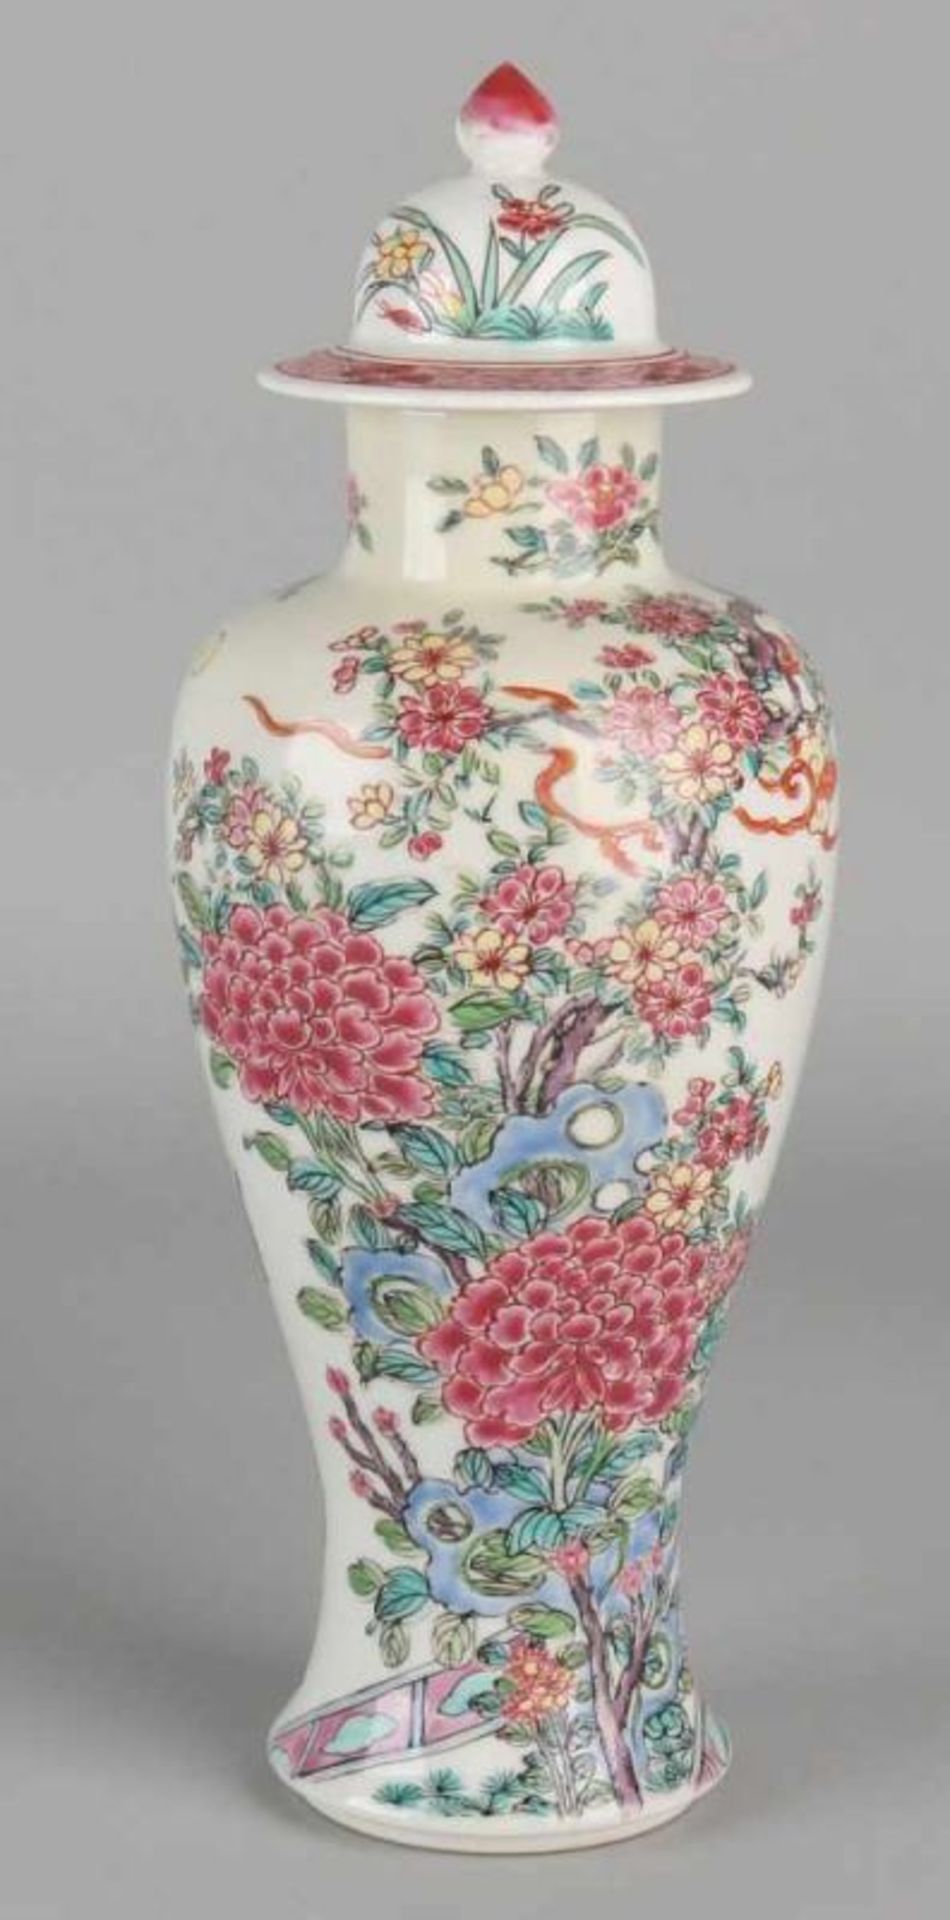 Finely decorated ancient Chinese porcelain Family Rose vase with figures in garden decor.